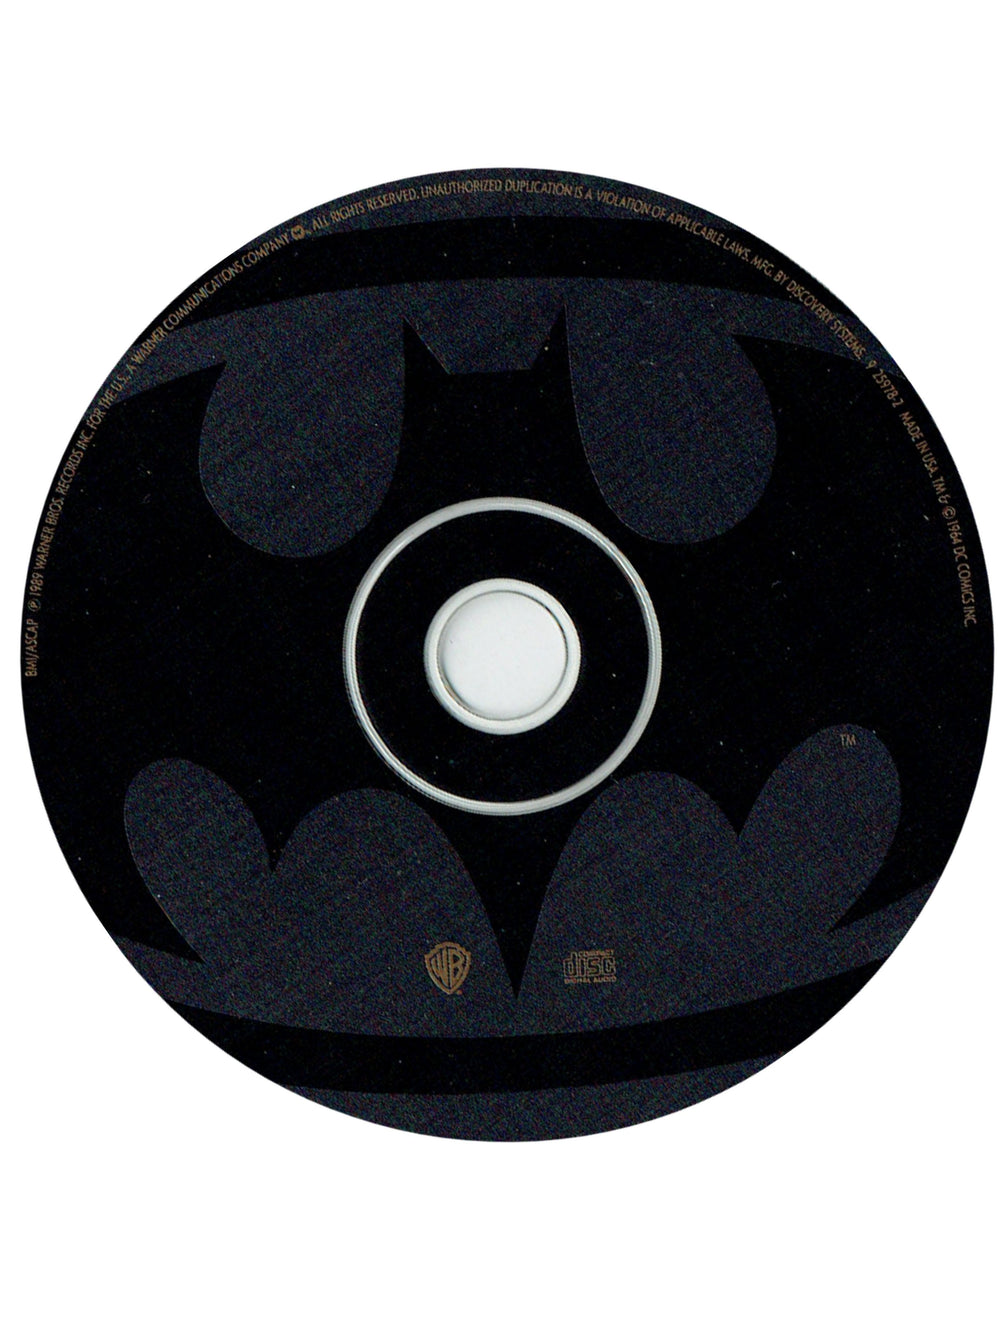 Prince Batman Soundtrack CD Album In A Round Embossed Tin 1989 Release SEALED